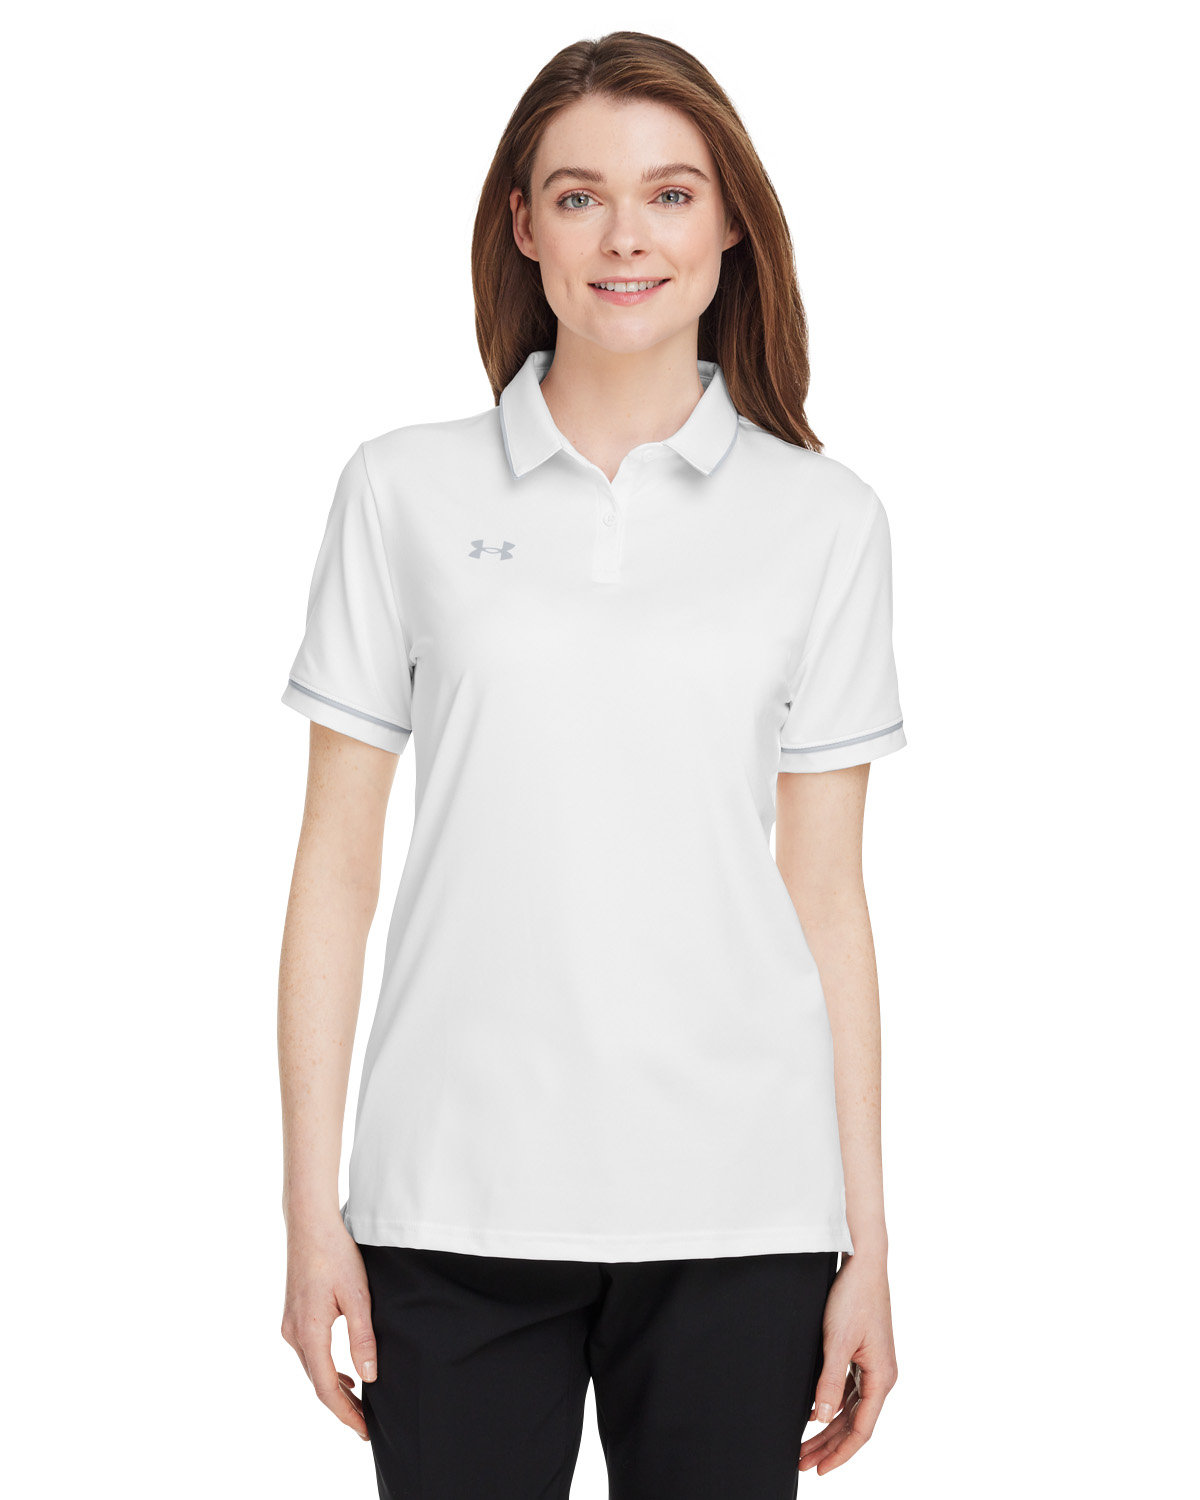 Ladies Tipped Teams Performance Polo-Under Armour